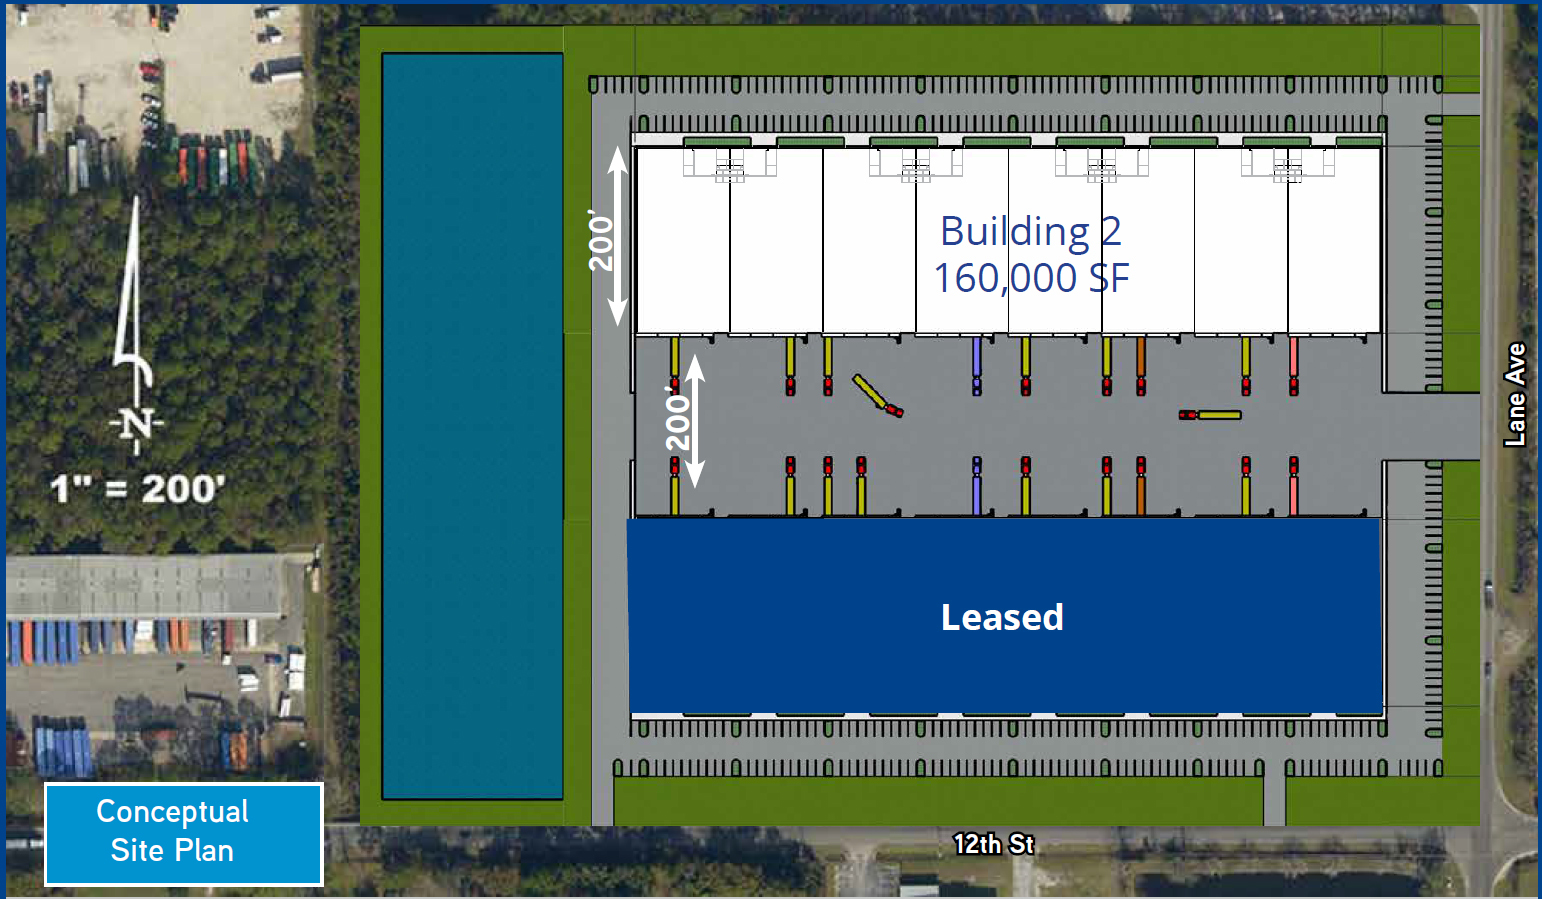 The site plan for Lane Industrial Park.